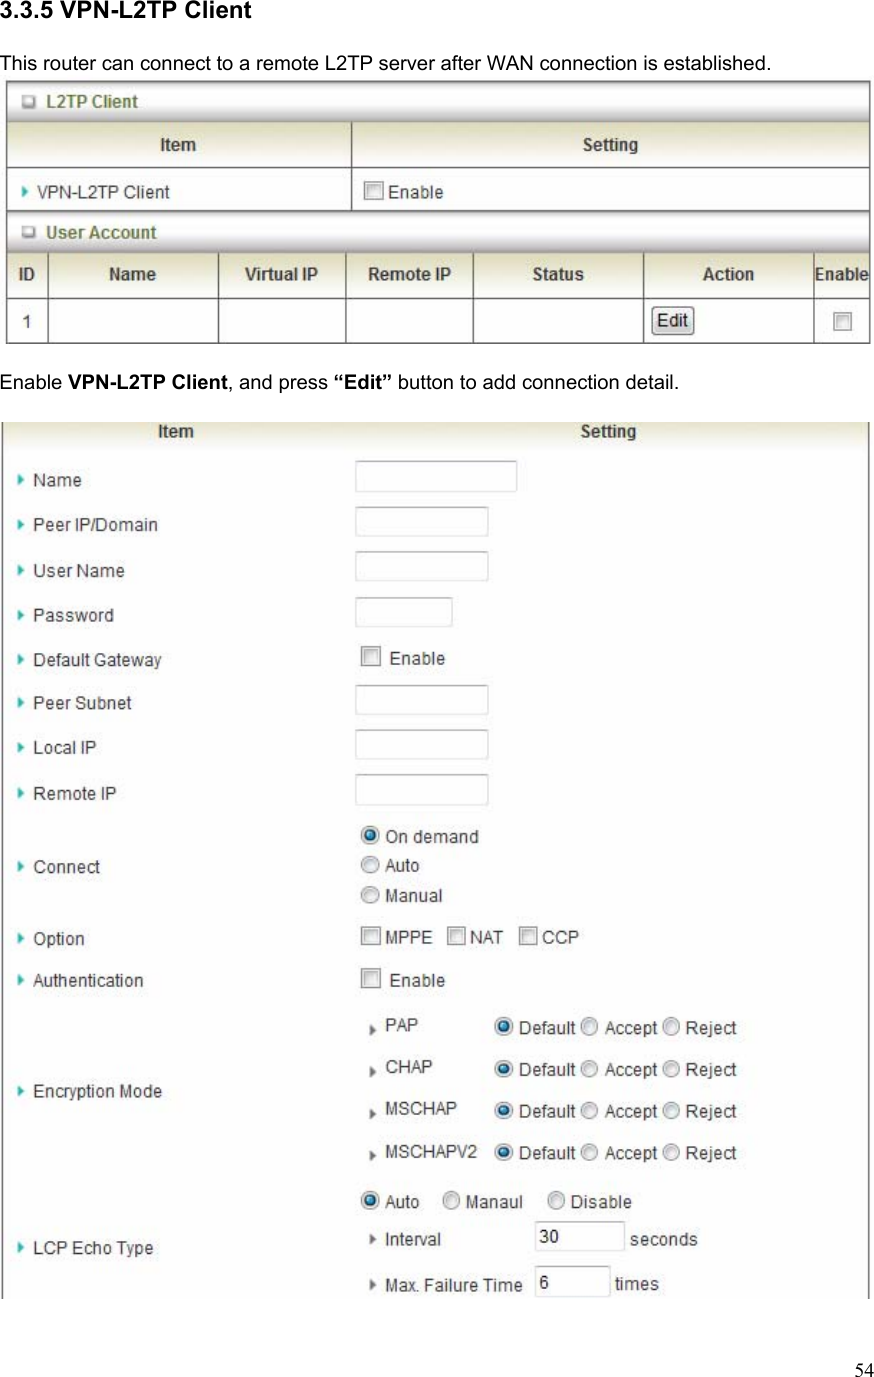  543.3.5 VPN-L2TP Client  This router can connect to a remote L2TP server after WAN connection is established.   Enable VPN-L2TP Client, and press “Edit” button to add connection detail.    